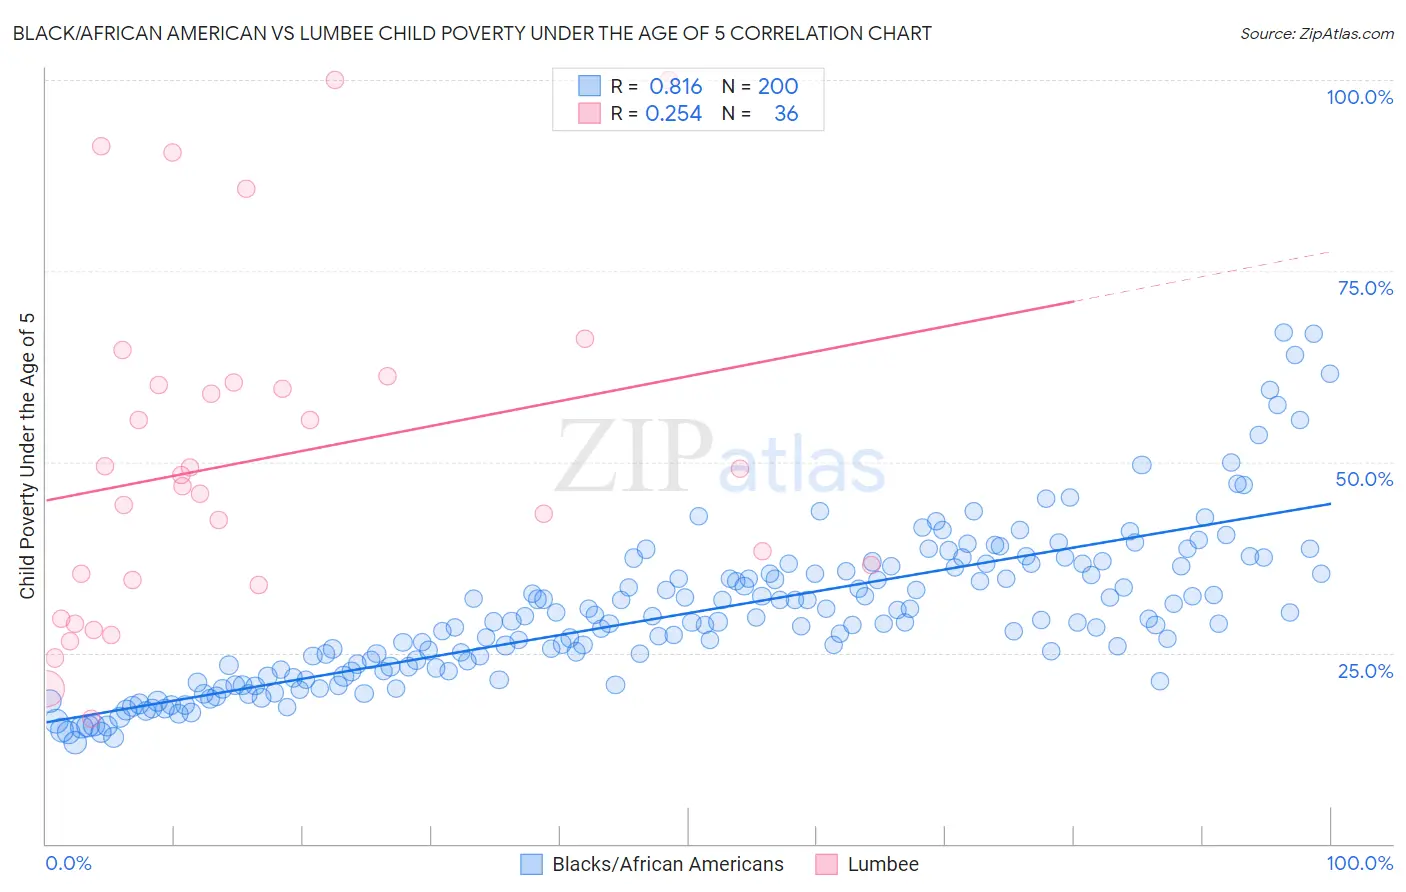 Black/African American vs Lumbee Child Poverty Under the Age of 5